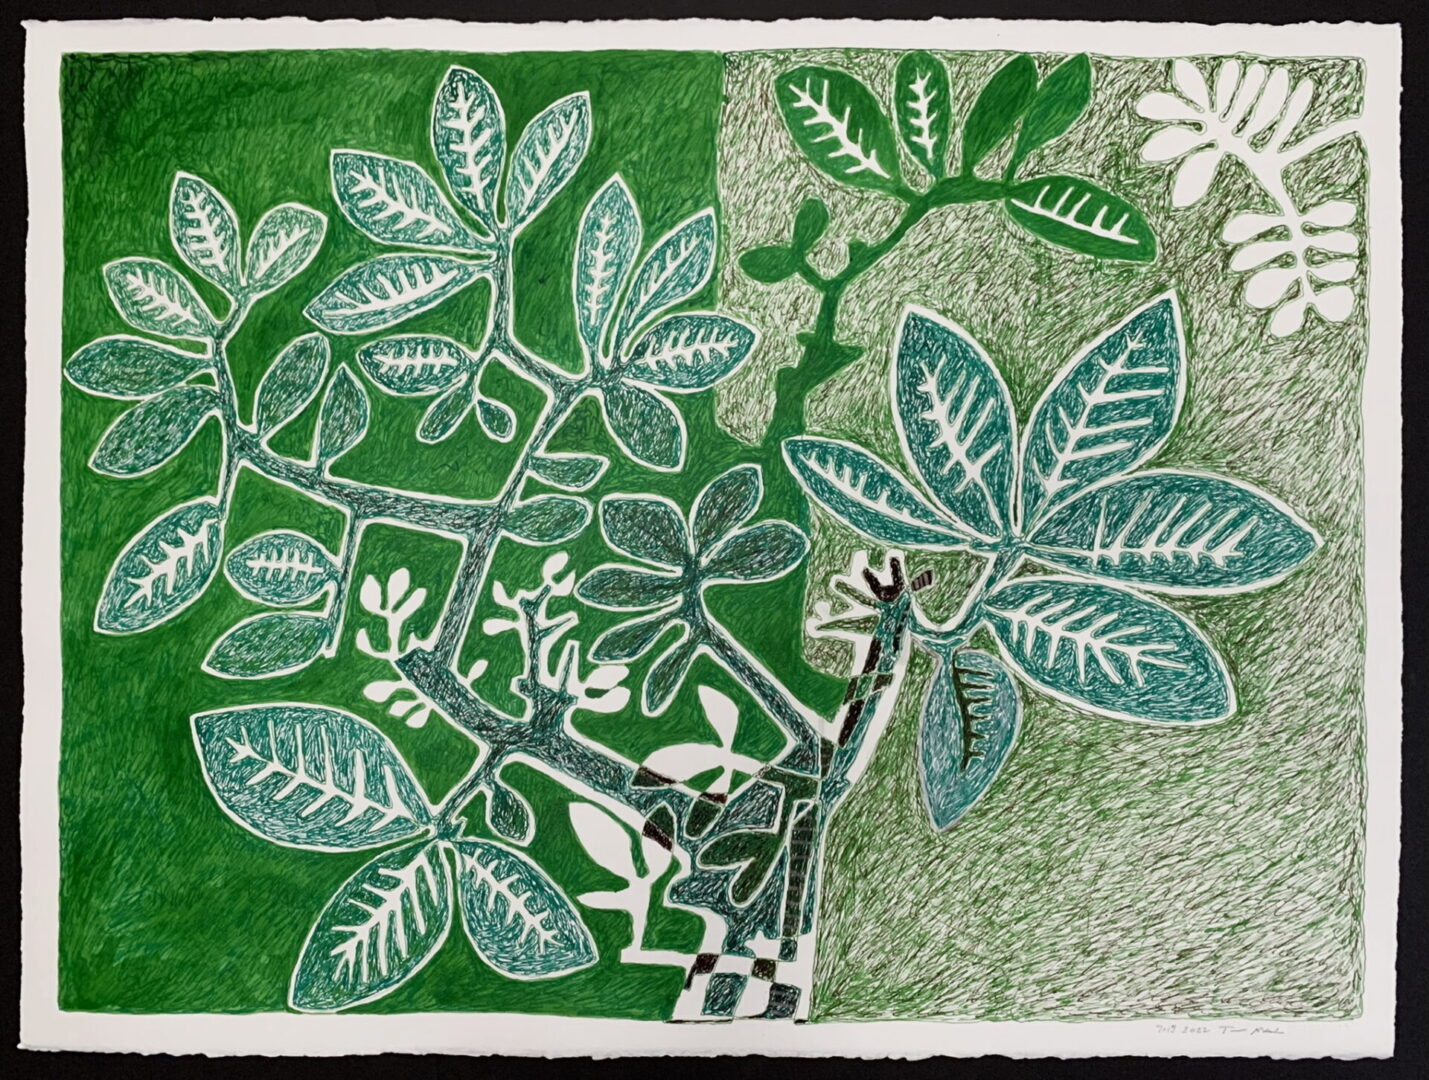 A green and white painting of leaves